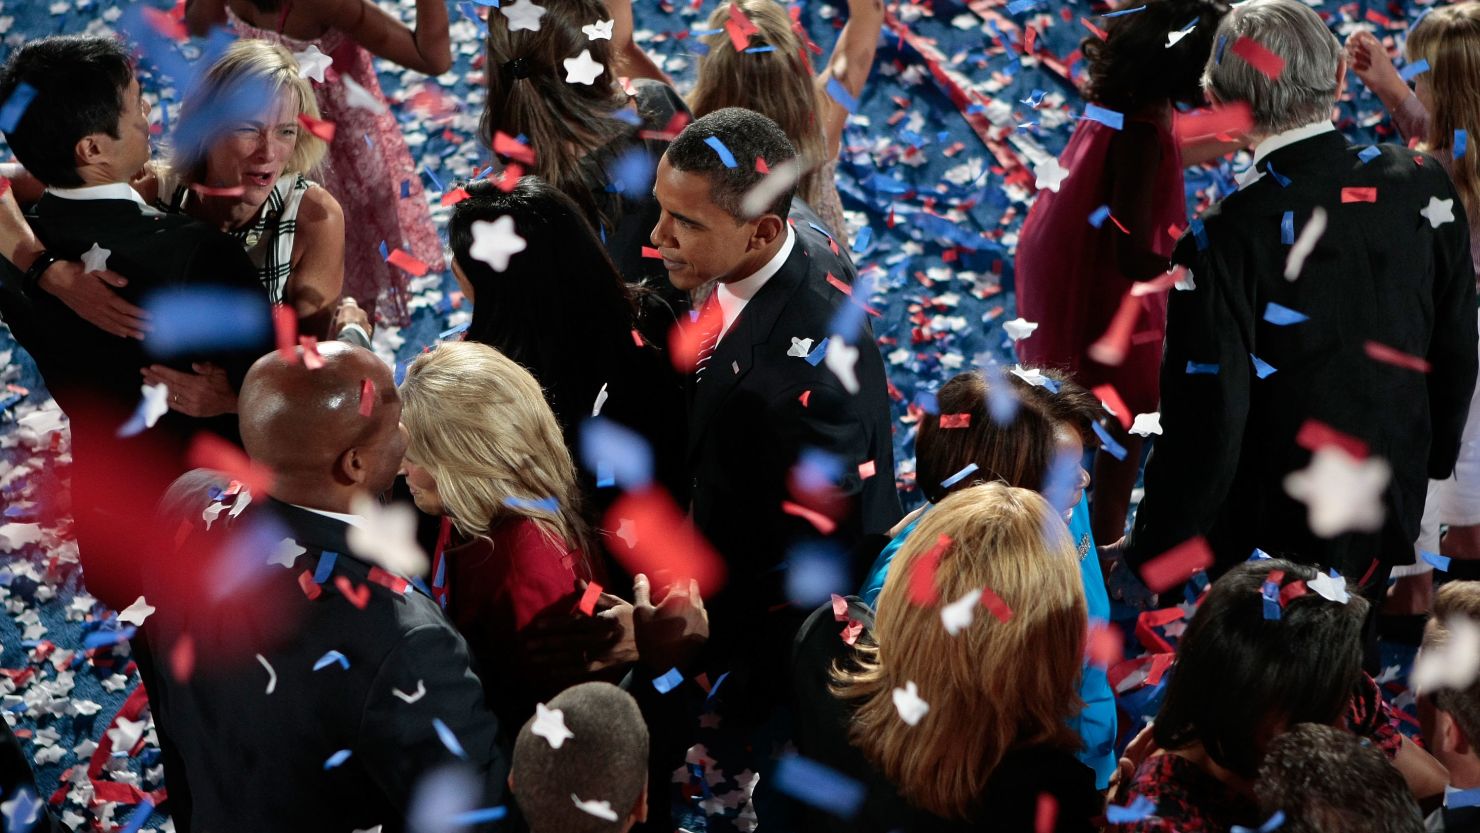 Then-Sen. Barack Obama stands among well-wishers at the 2008 Democratic National Convention in Denver.